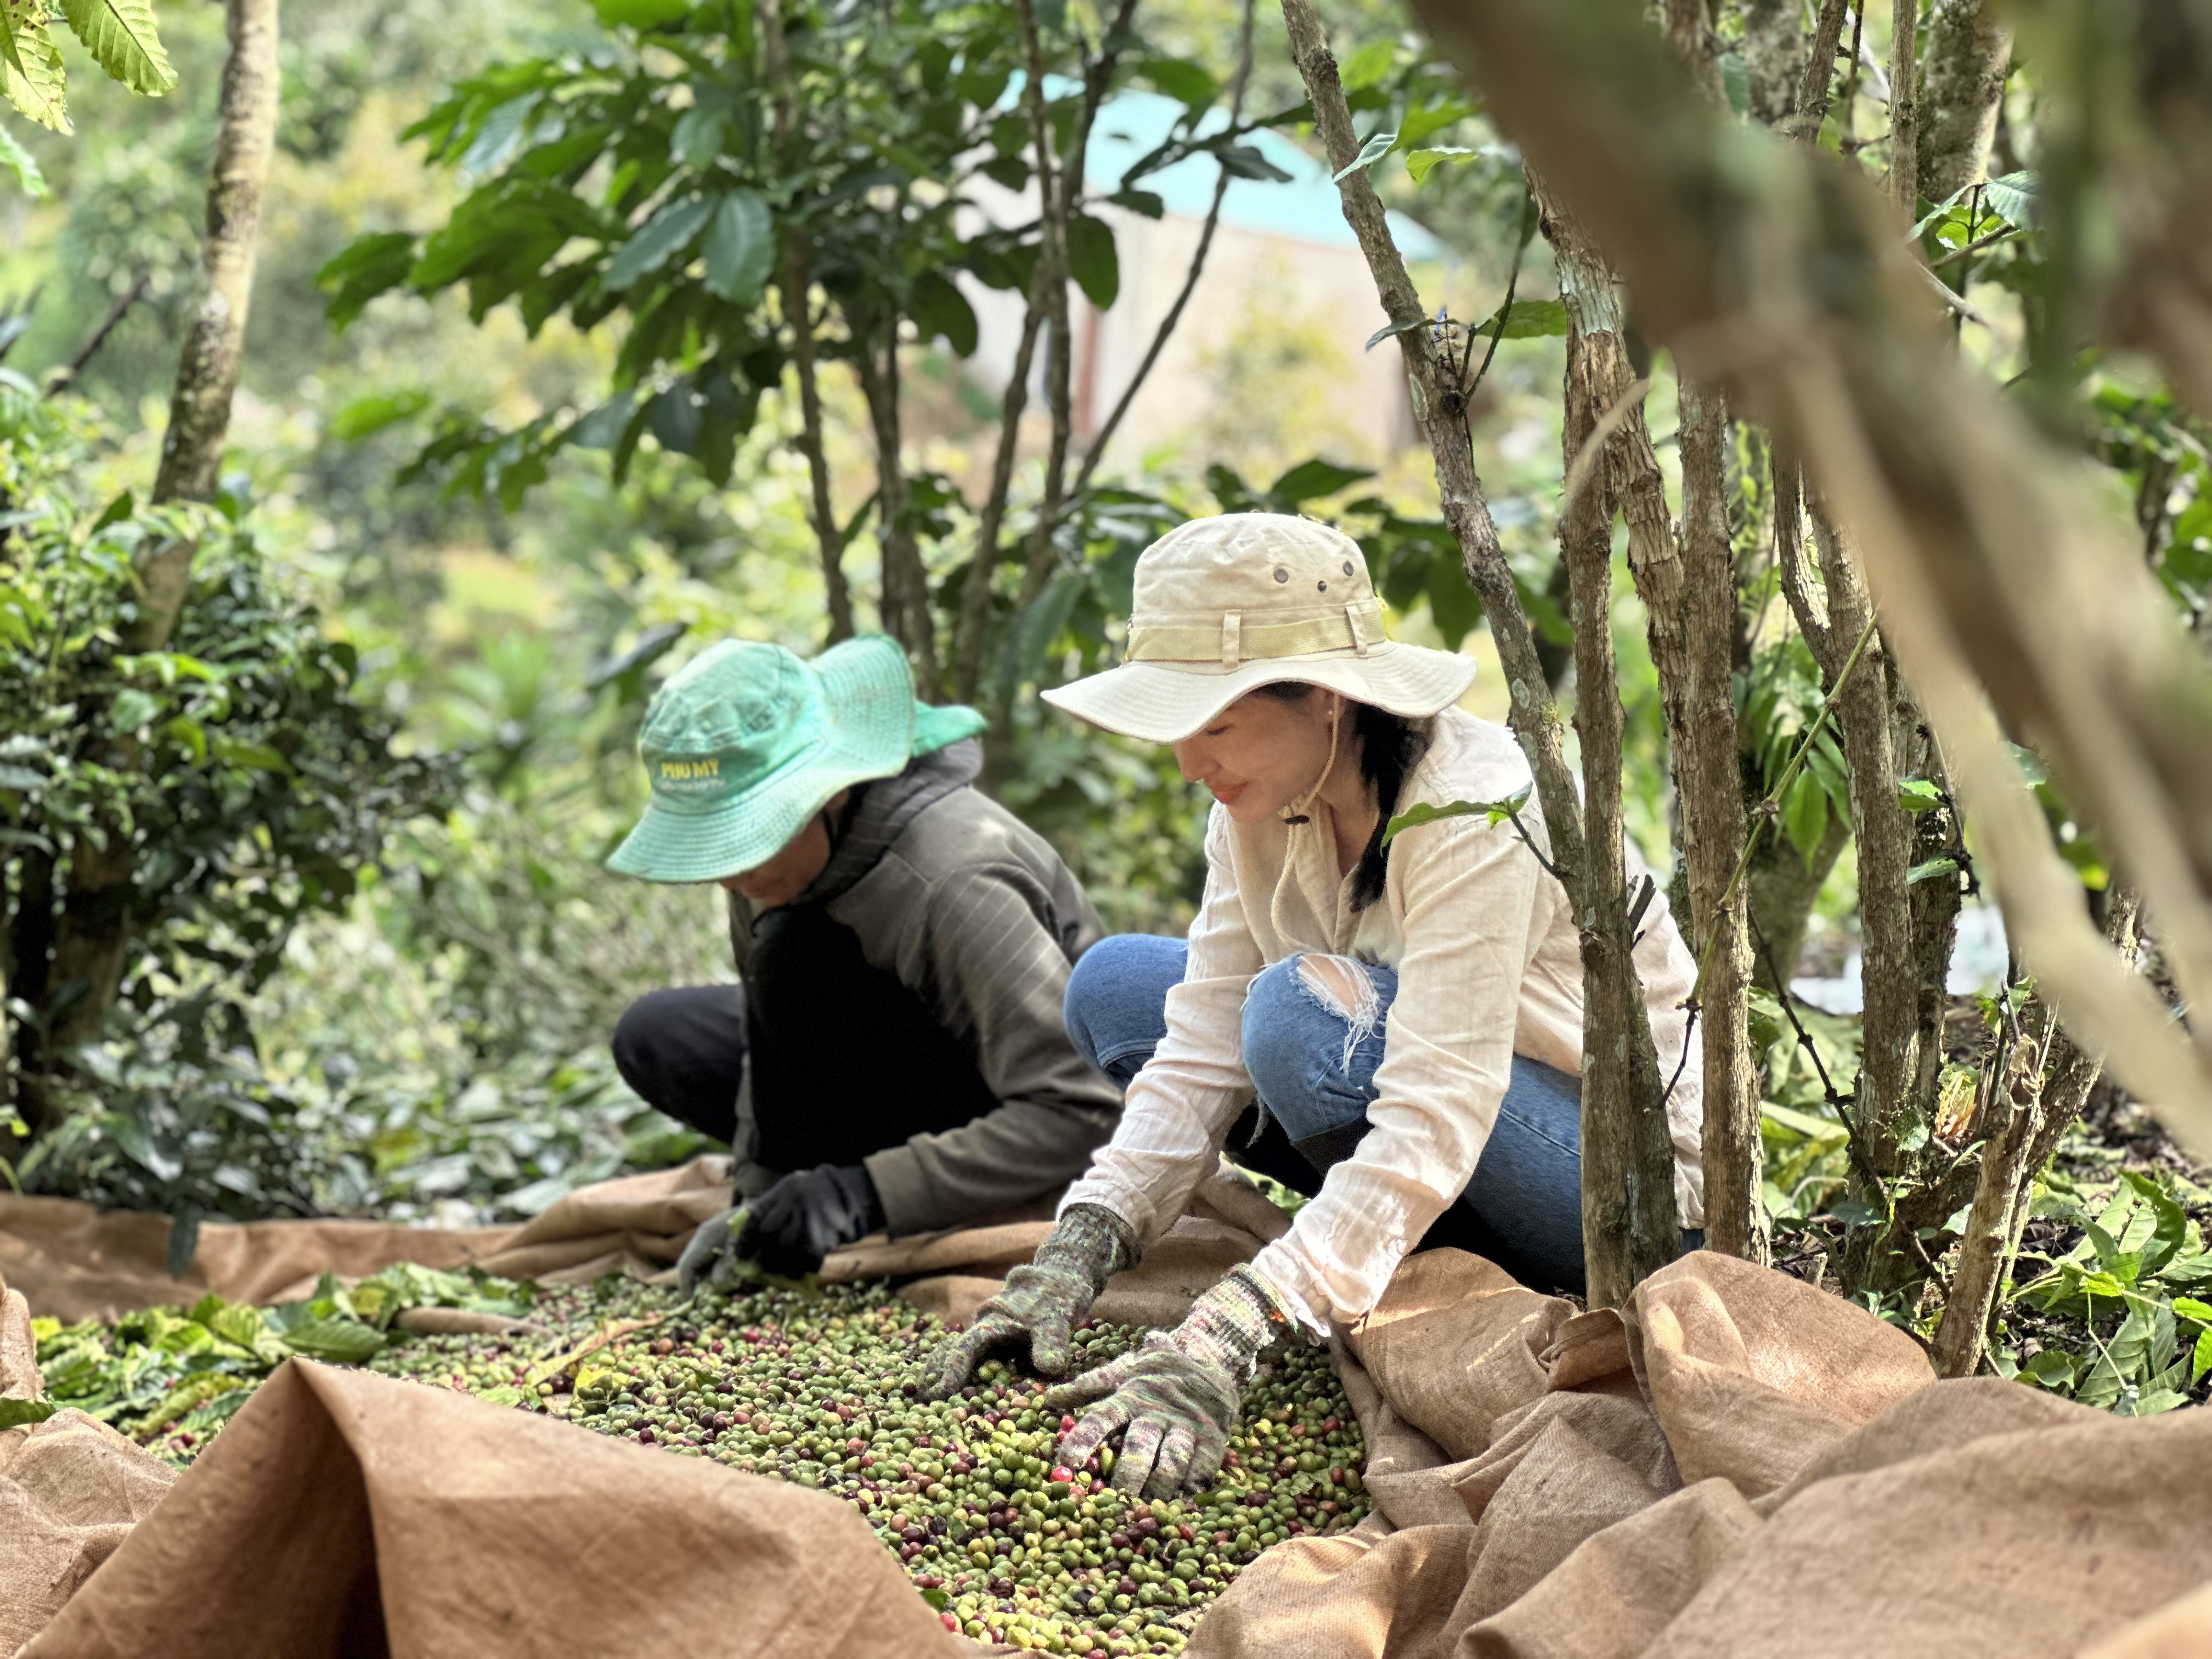 Dao Thuy Linh (right) joins local people to harvest coffee in Loc Lam Commune, Bao Lam District, Lam Dong Province in November 2023. Photo: Supplied